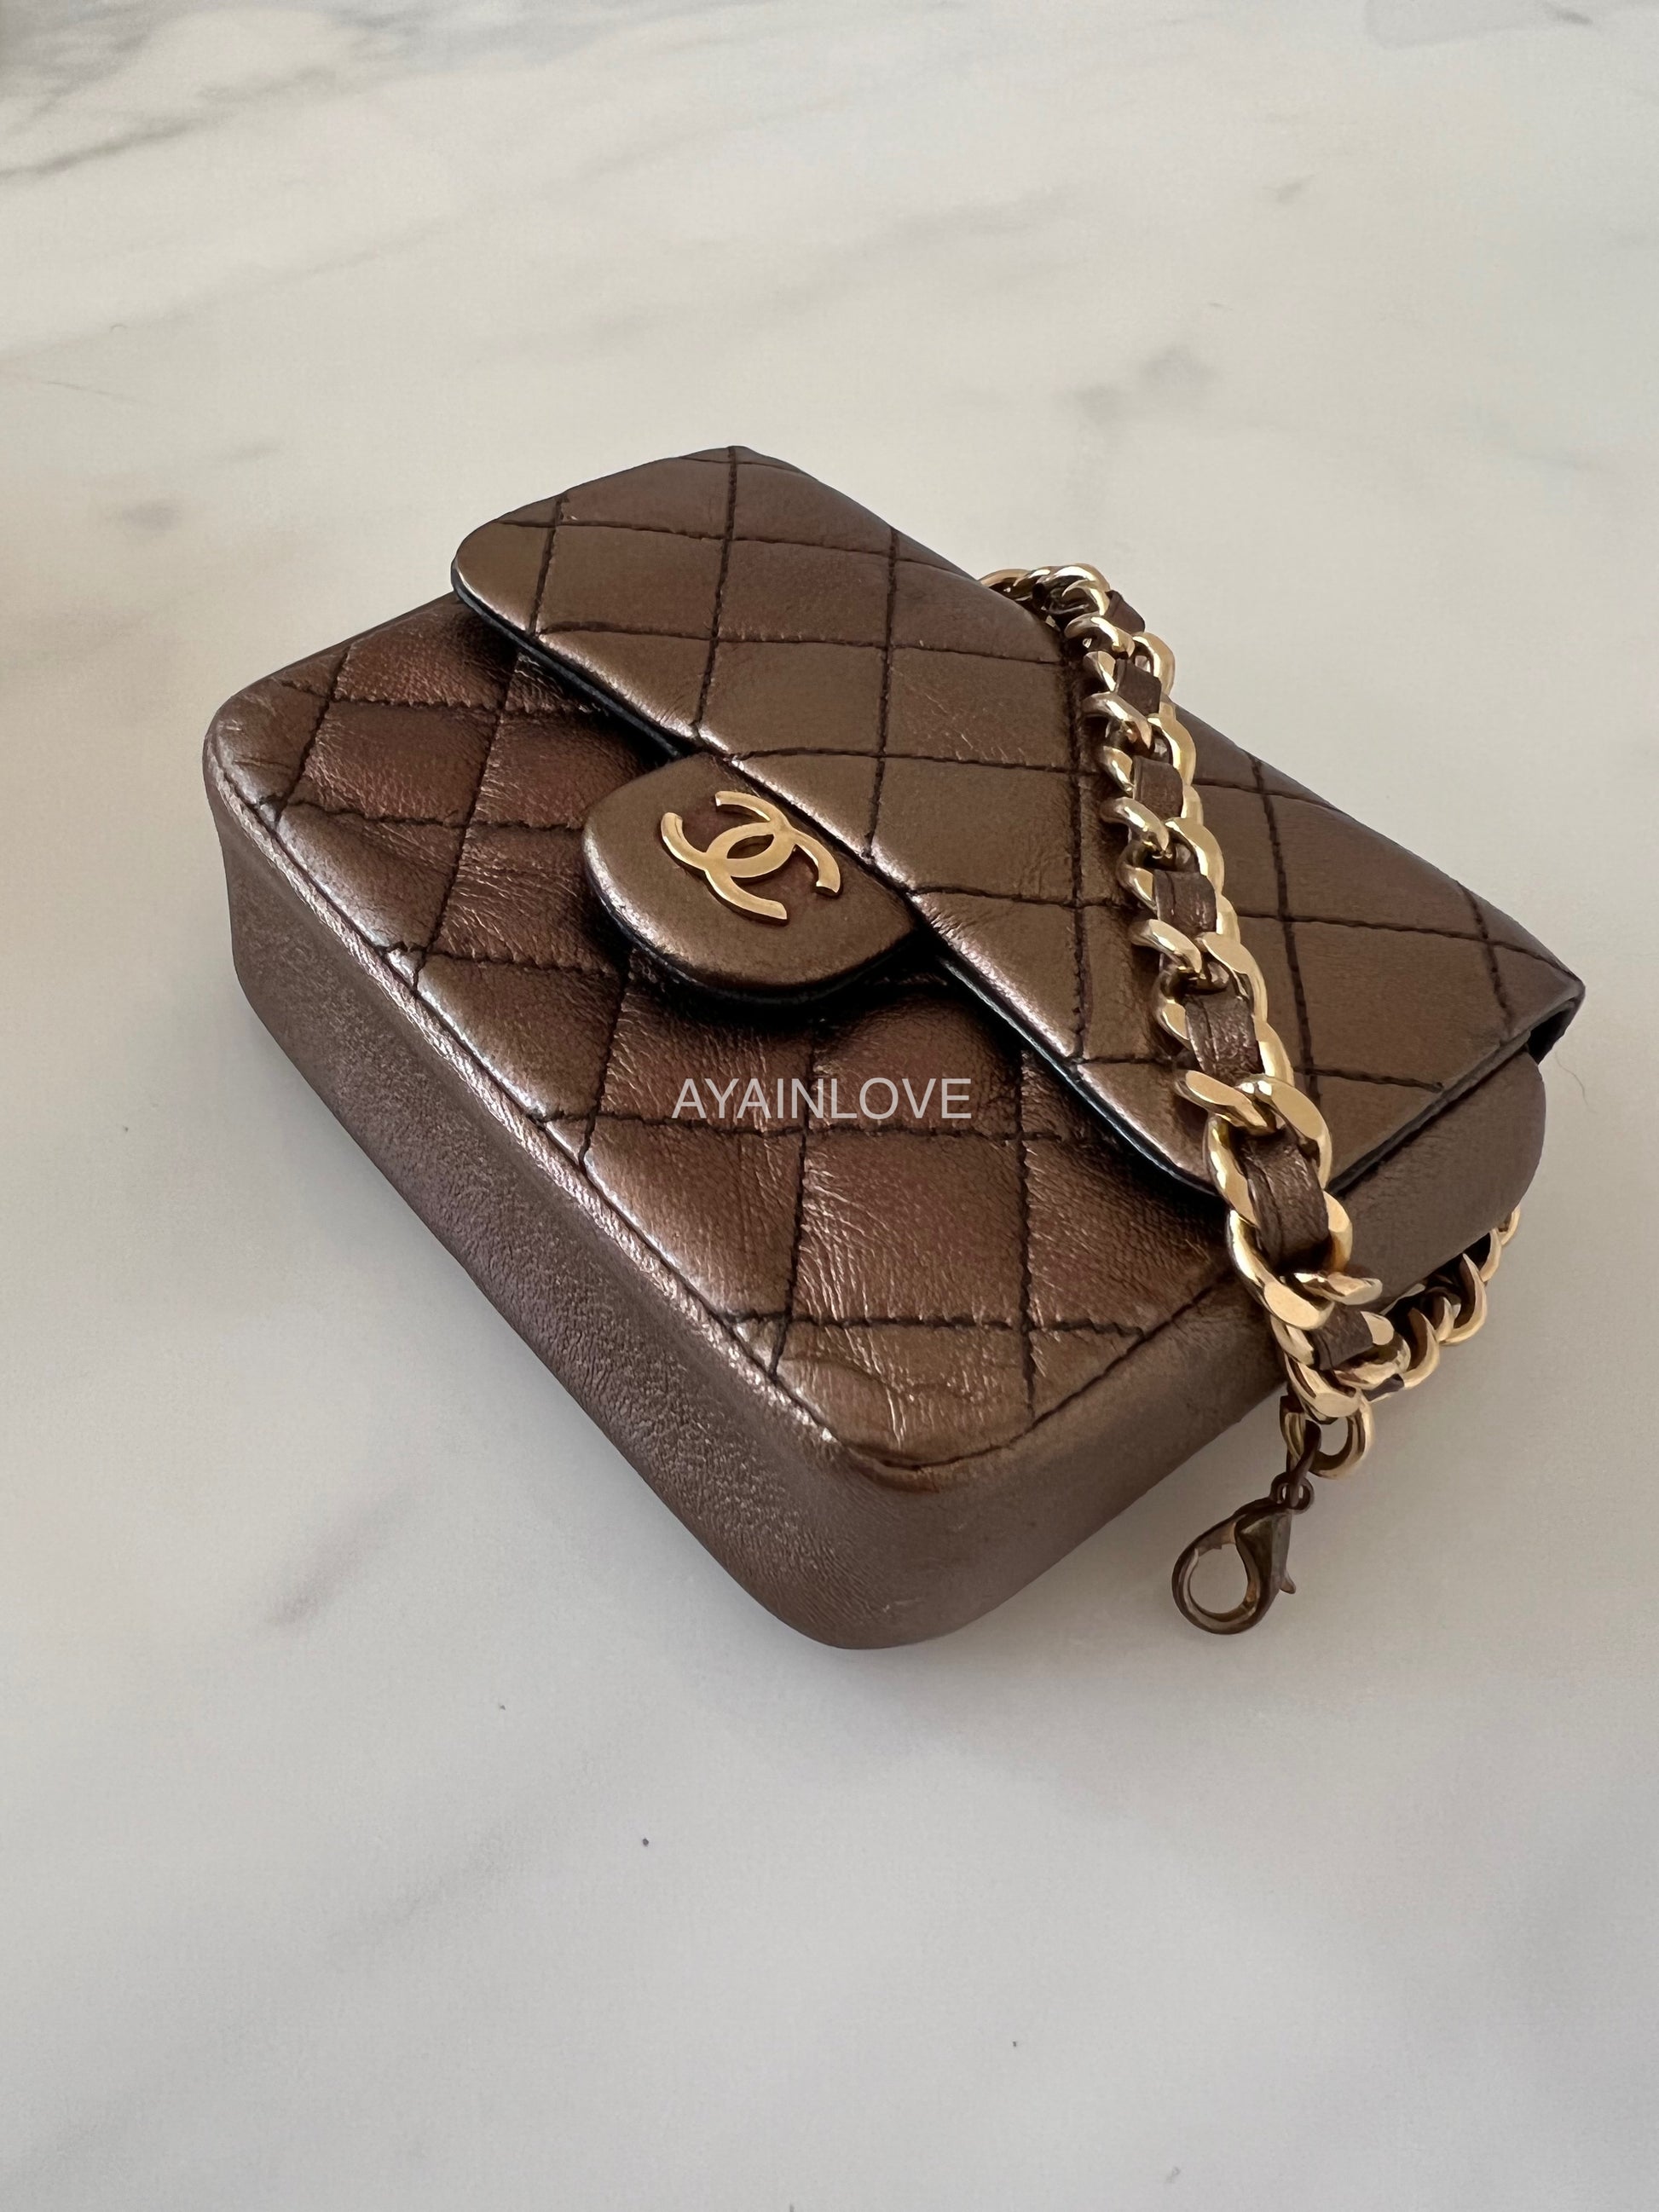 chanel bag gold plate